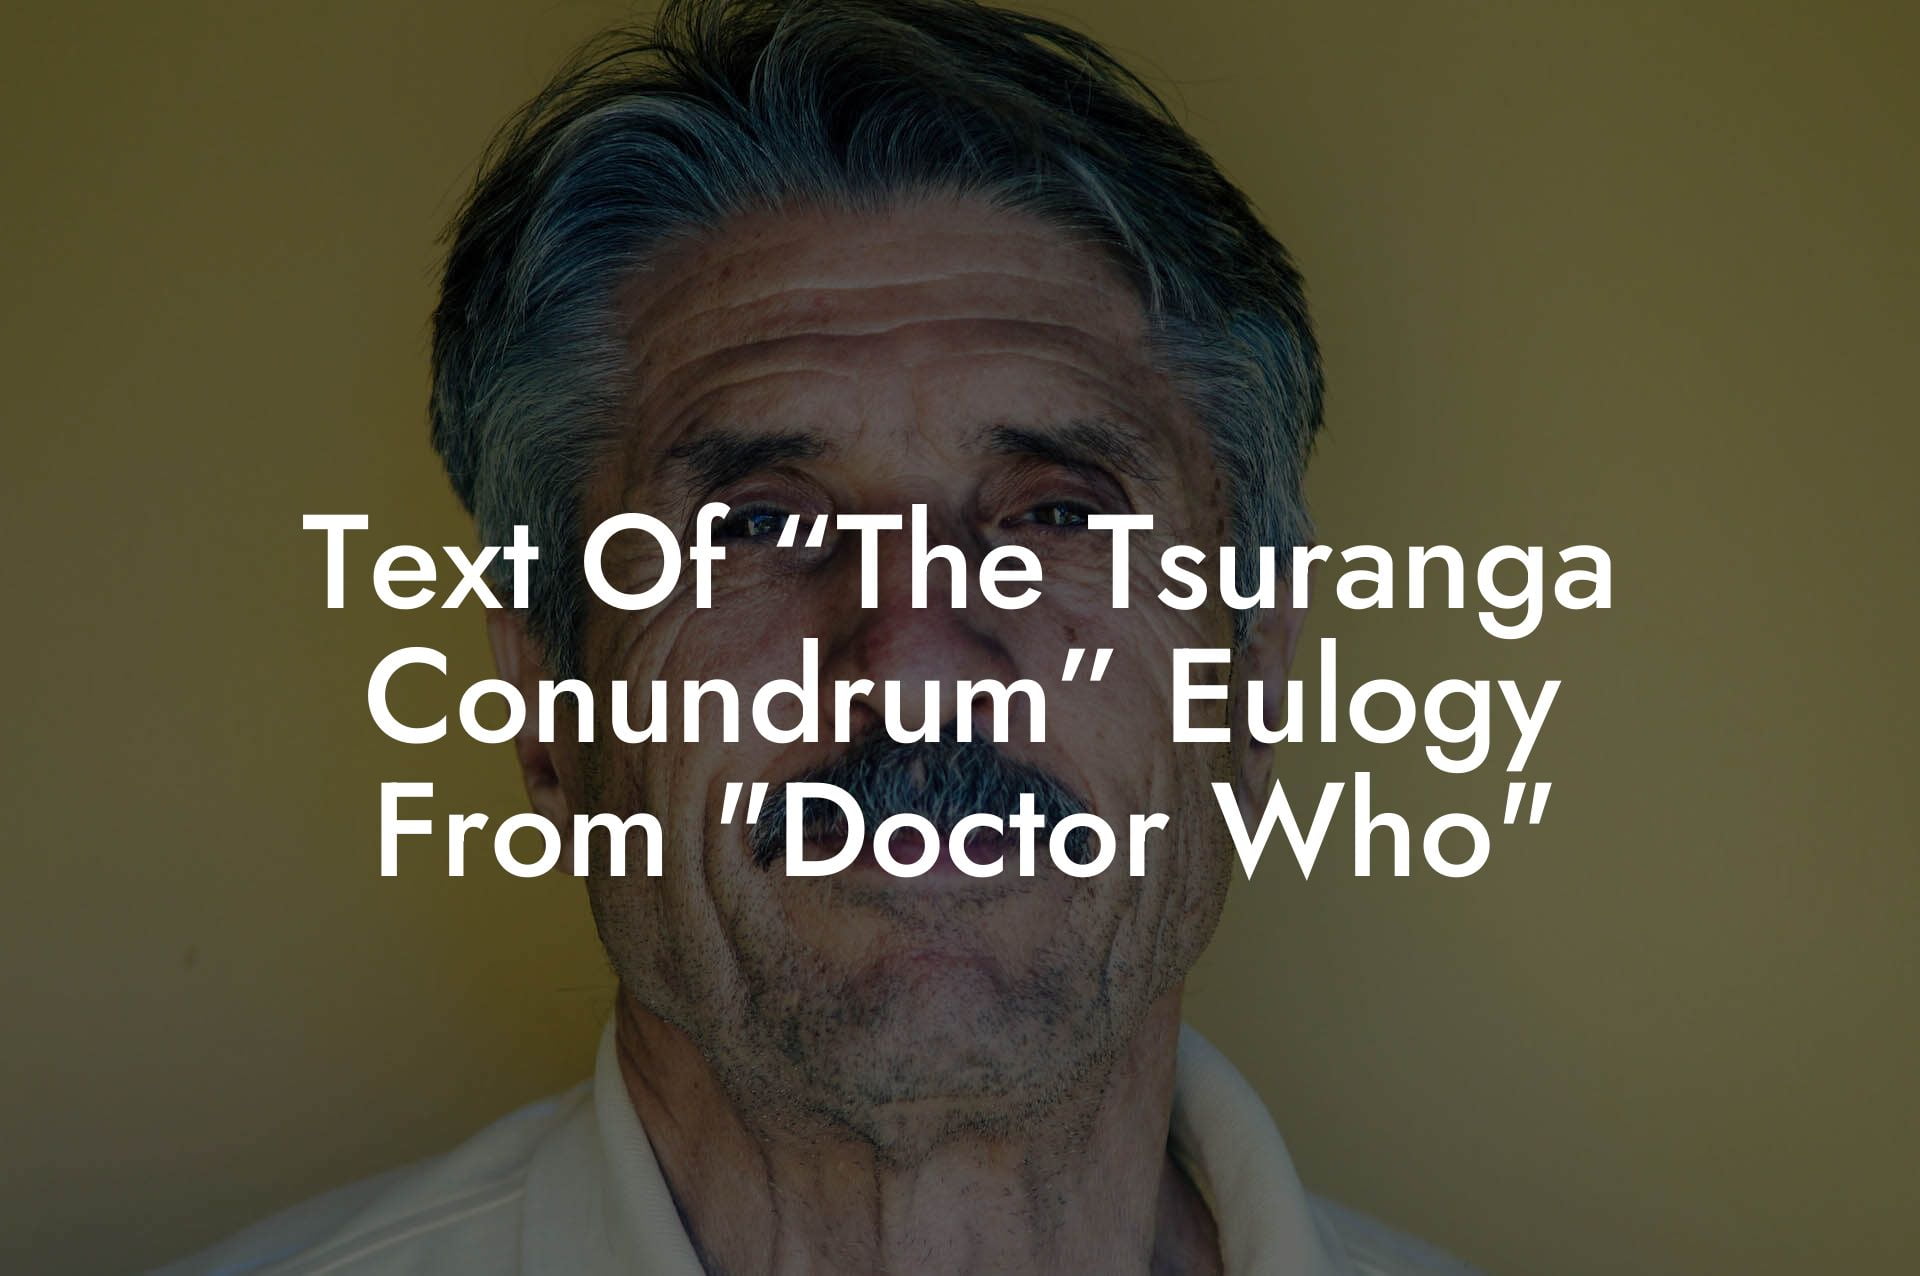 Text Of “The Tsuranga Conundrum” Eulogy From "Doctor Who"